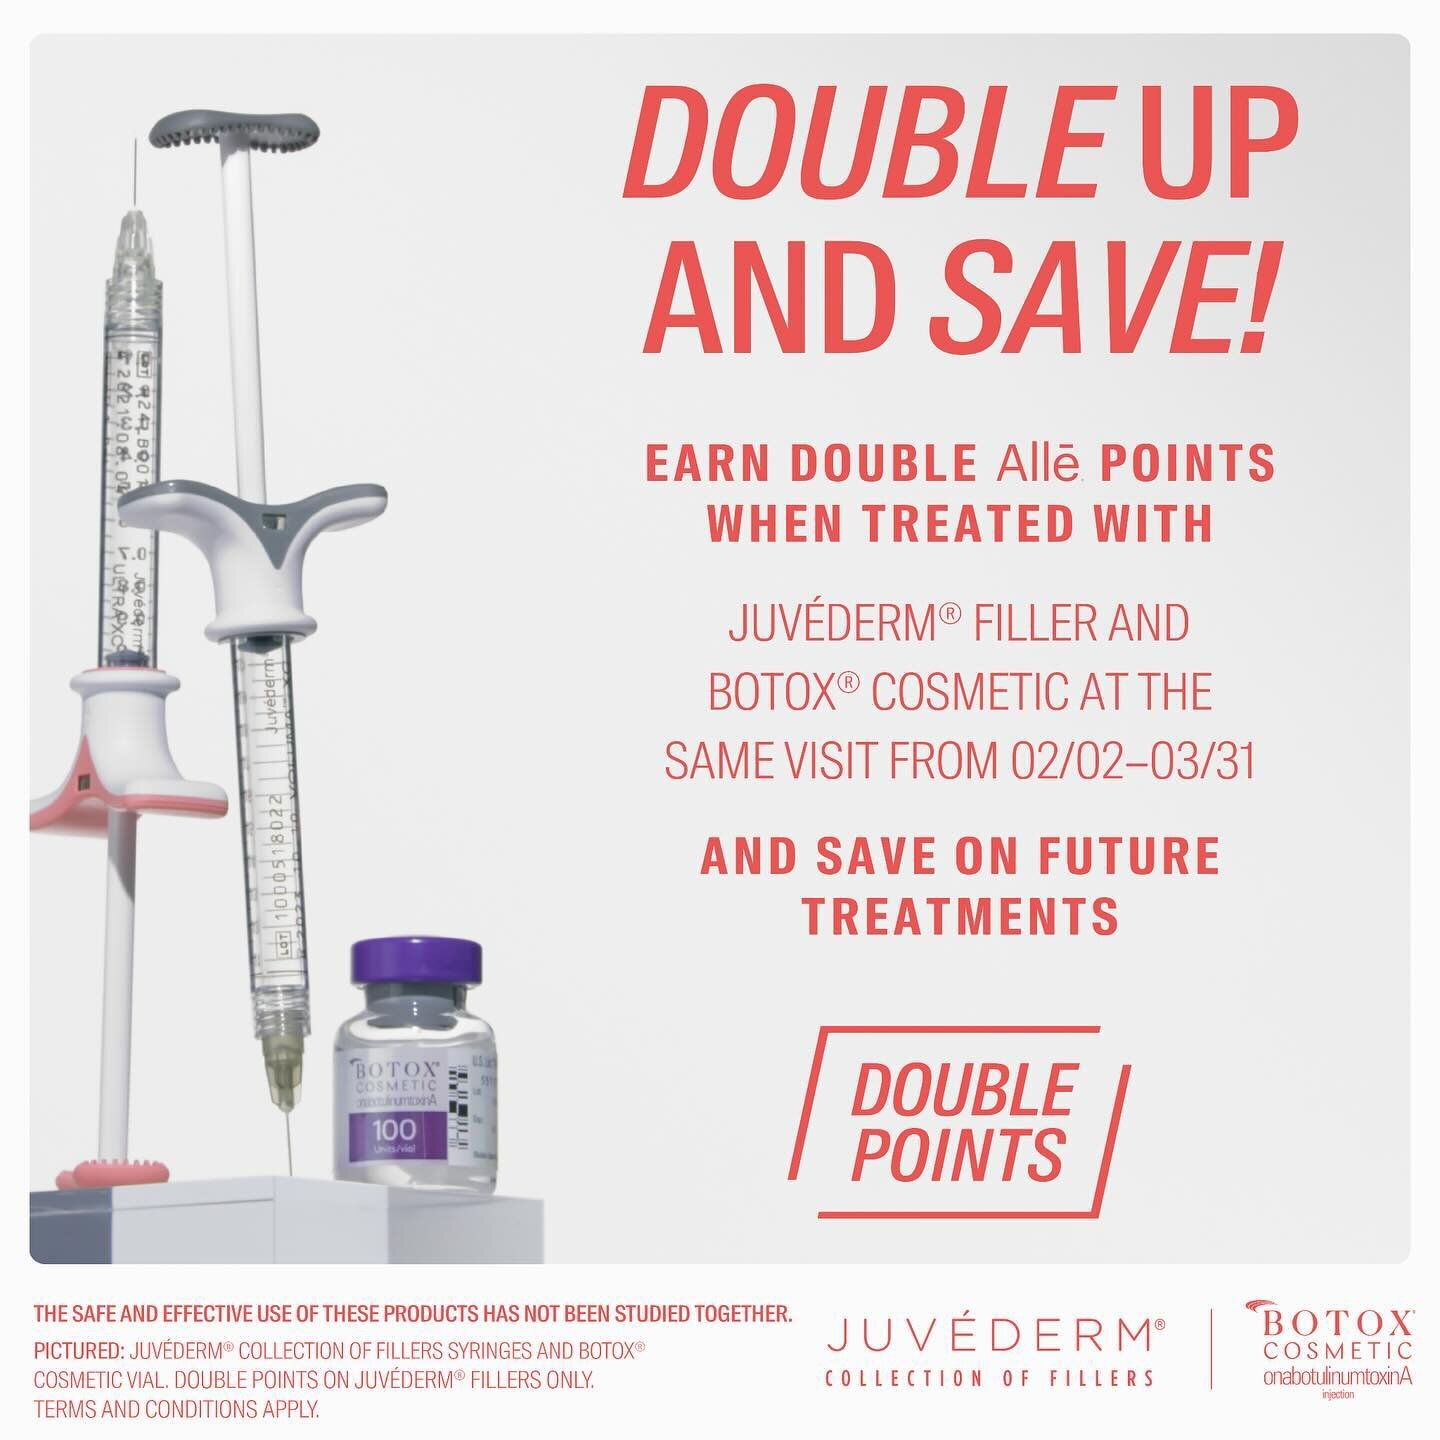 Don&rsquo;t miss your chance to double up! ✨🤍From 02/24&ndash;03/31, earn double Allē points on the JUV&Eacute;DERM&reg; Collection of Fillers when treated with JUV&Eacute;DERM&reg; Filler and BOTOX&reg; Cosmetic &nbsp;at the same visit. What are yo